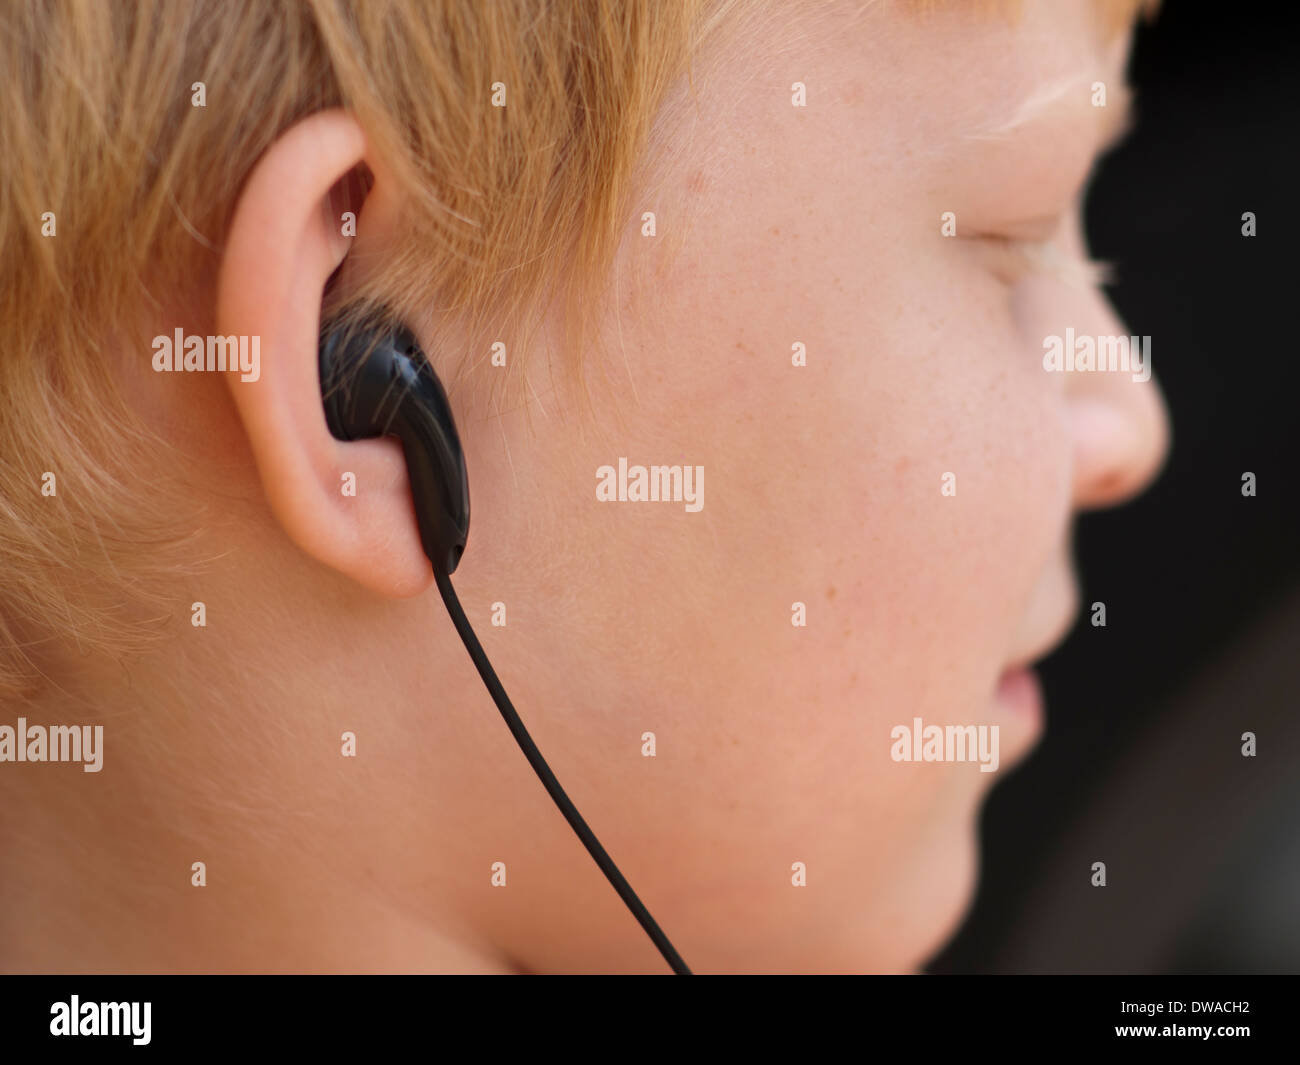 Portrait of a 7-year old boy listening to his MP3-player using in-ear earphones. Stock Photo